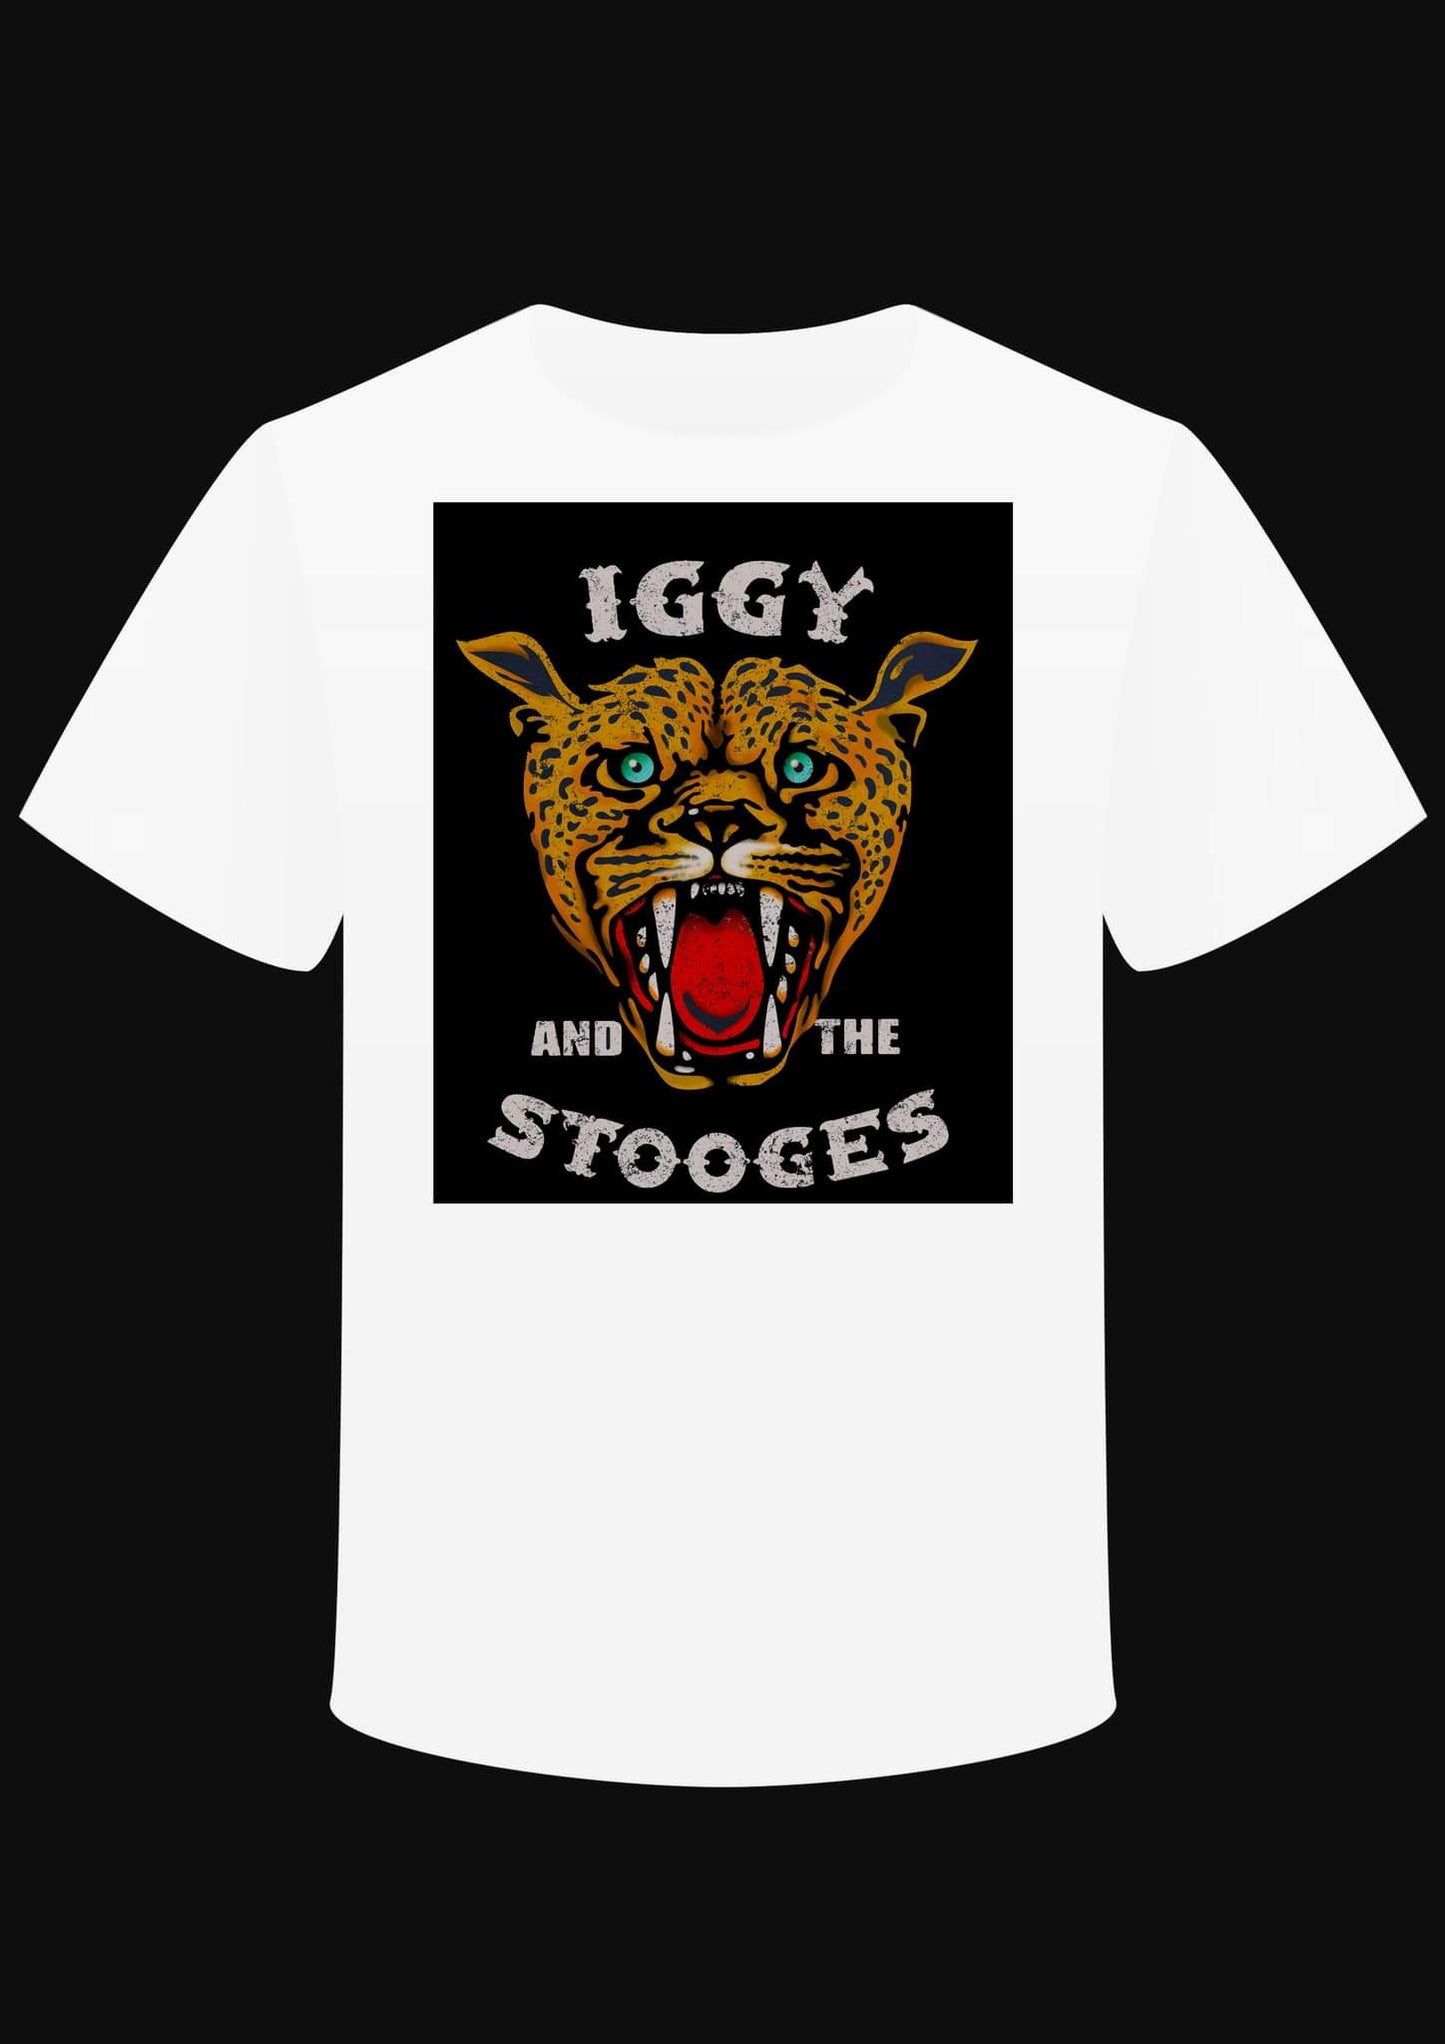 T-shirt "Iggy and the Stooges"